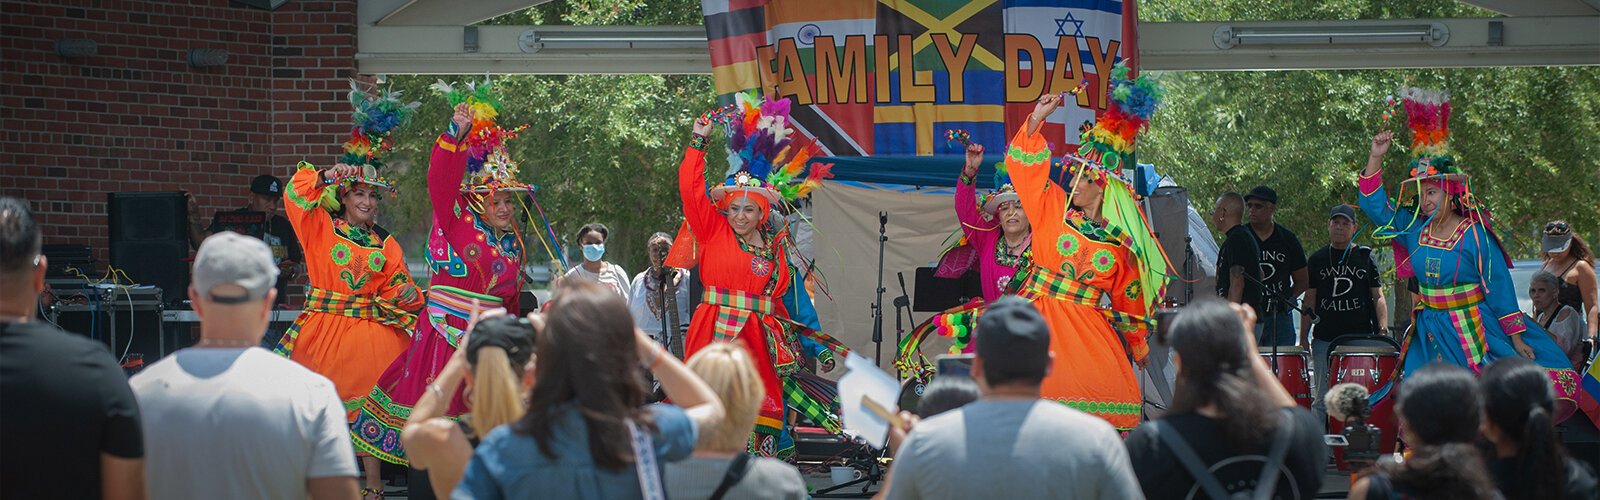 Bolivian Roots perform at the Multicultural Family Day event at Water Works Park Sunday.